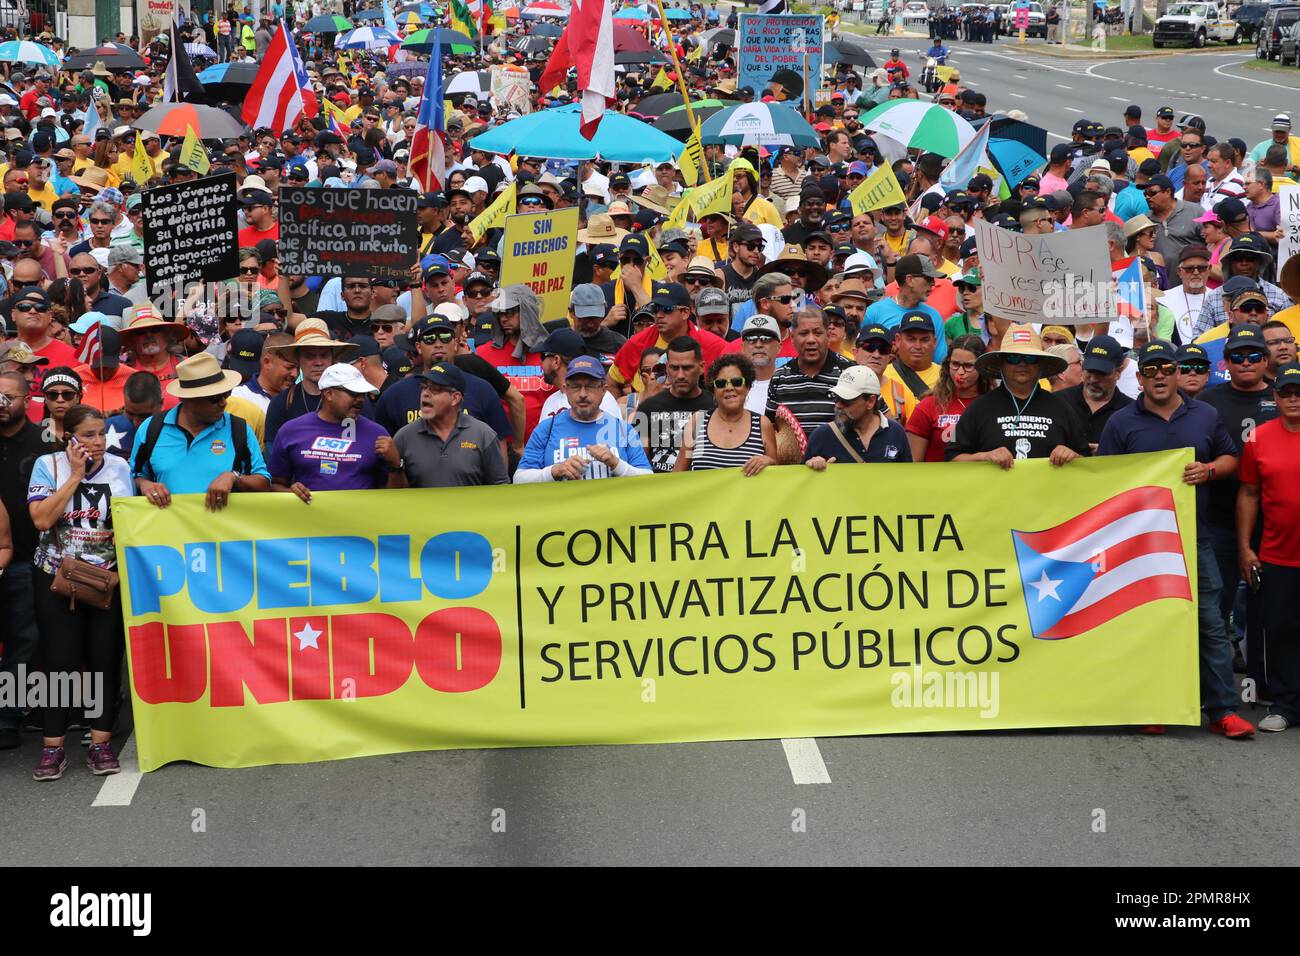 A large group of people marching to protest against the Privatization of Public-Sector Services Stock Photo